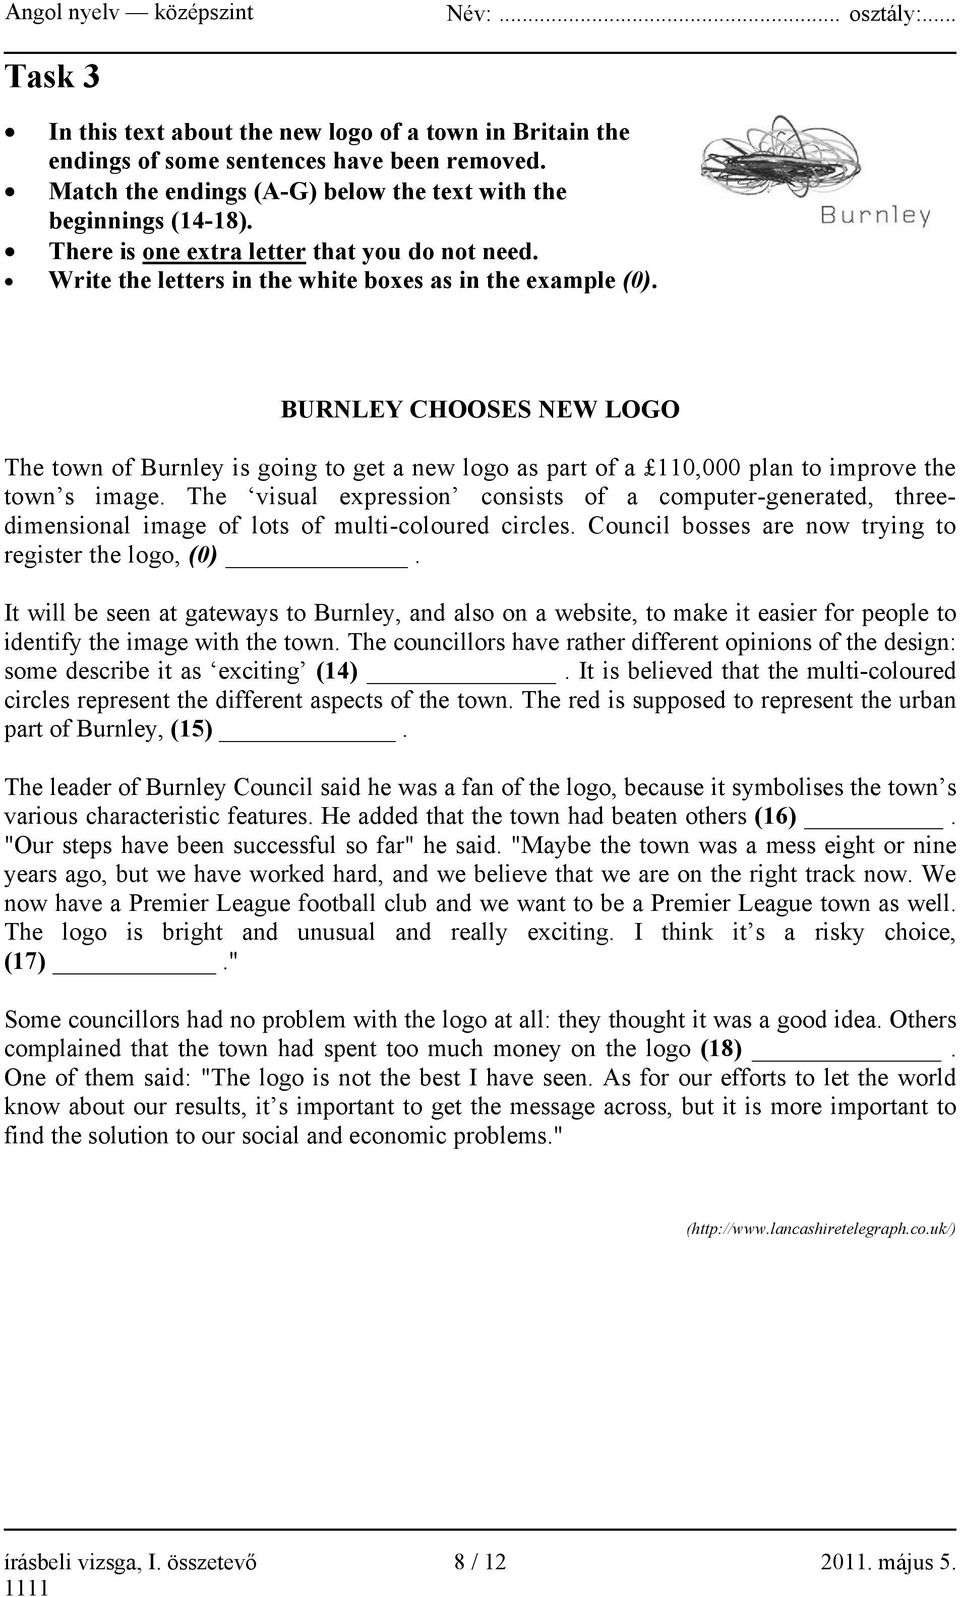 BURNLEY CHOOSES NEW LOGO The town of Burnley is going to get a new logo as part of a 110,000 plan to improve the town s image.